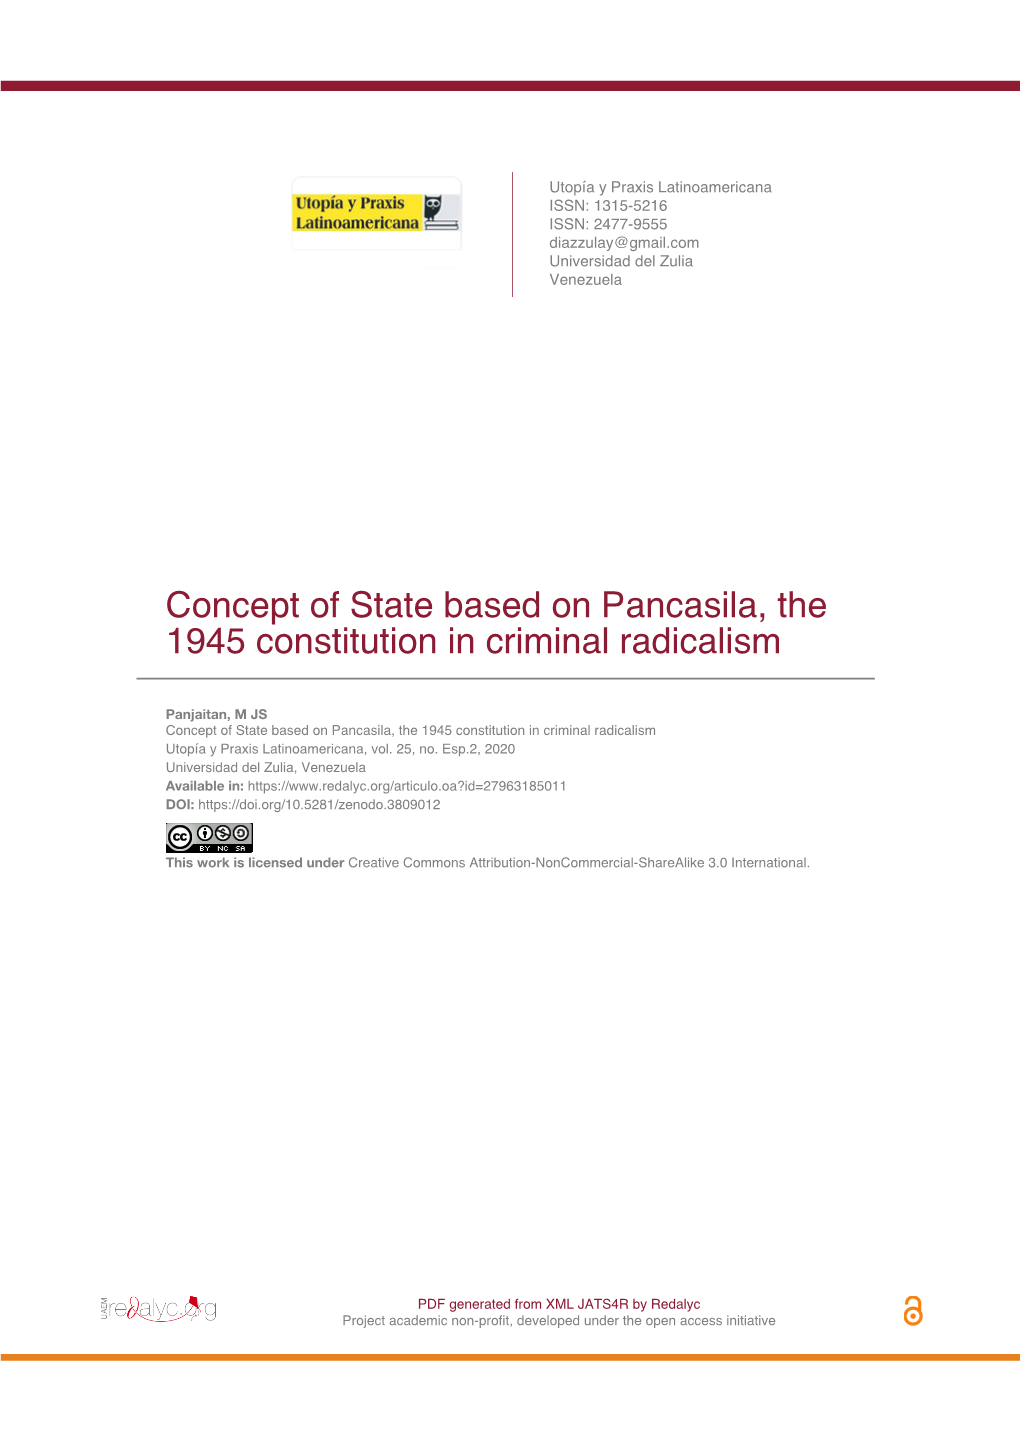 Concept of State Based on Pancasila, the 1945 Constitution in Criminal Radicalism